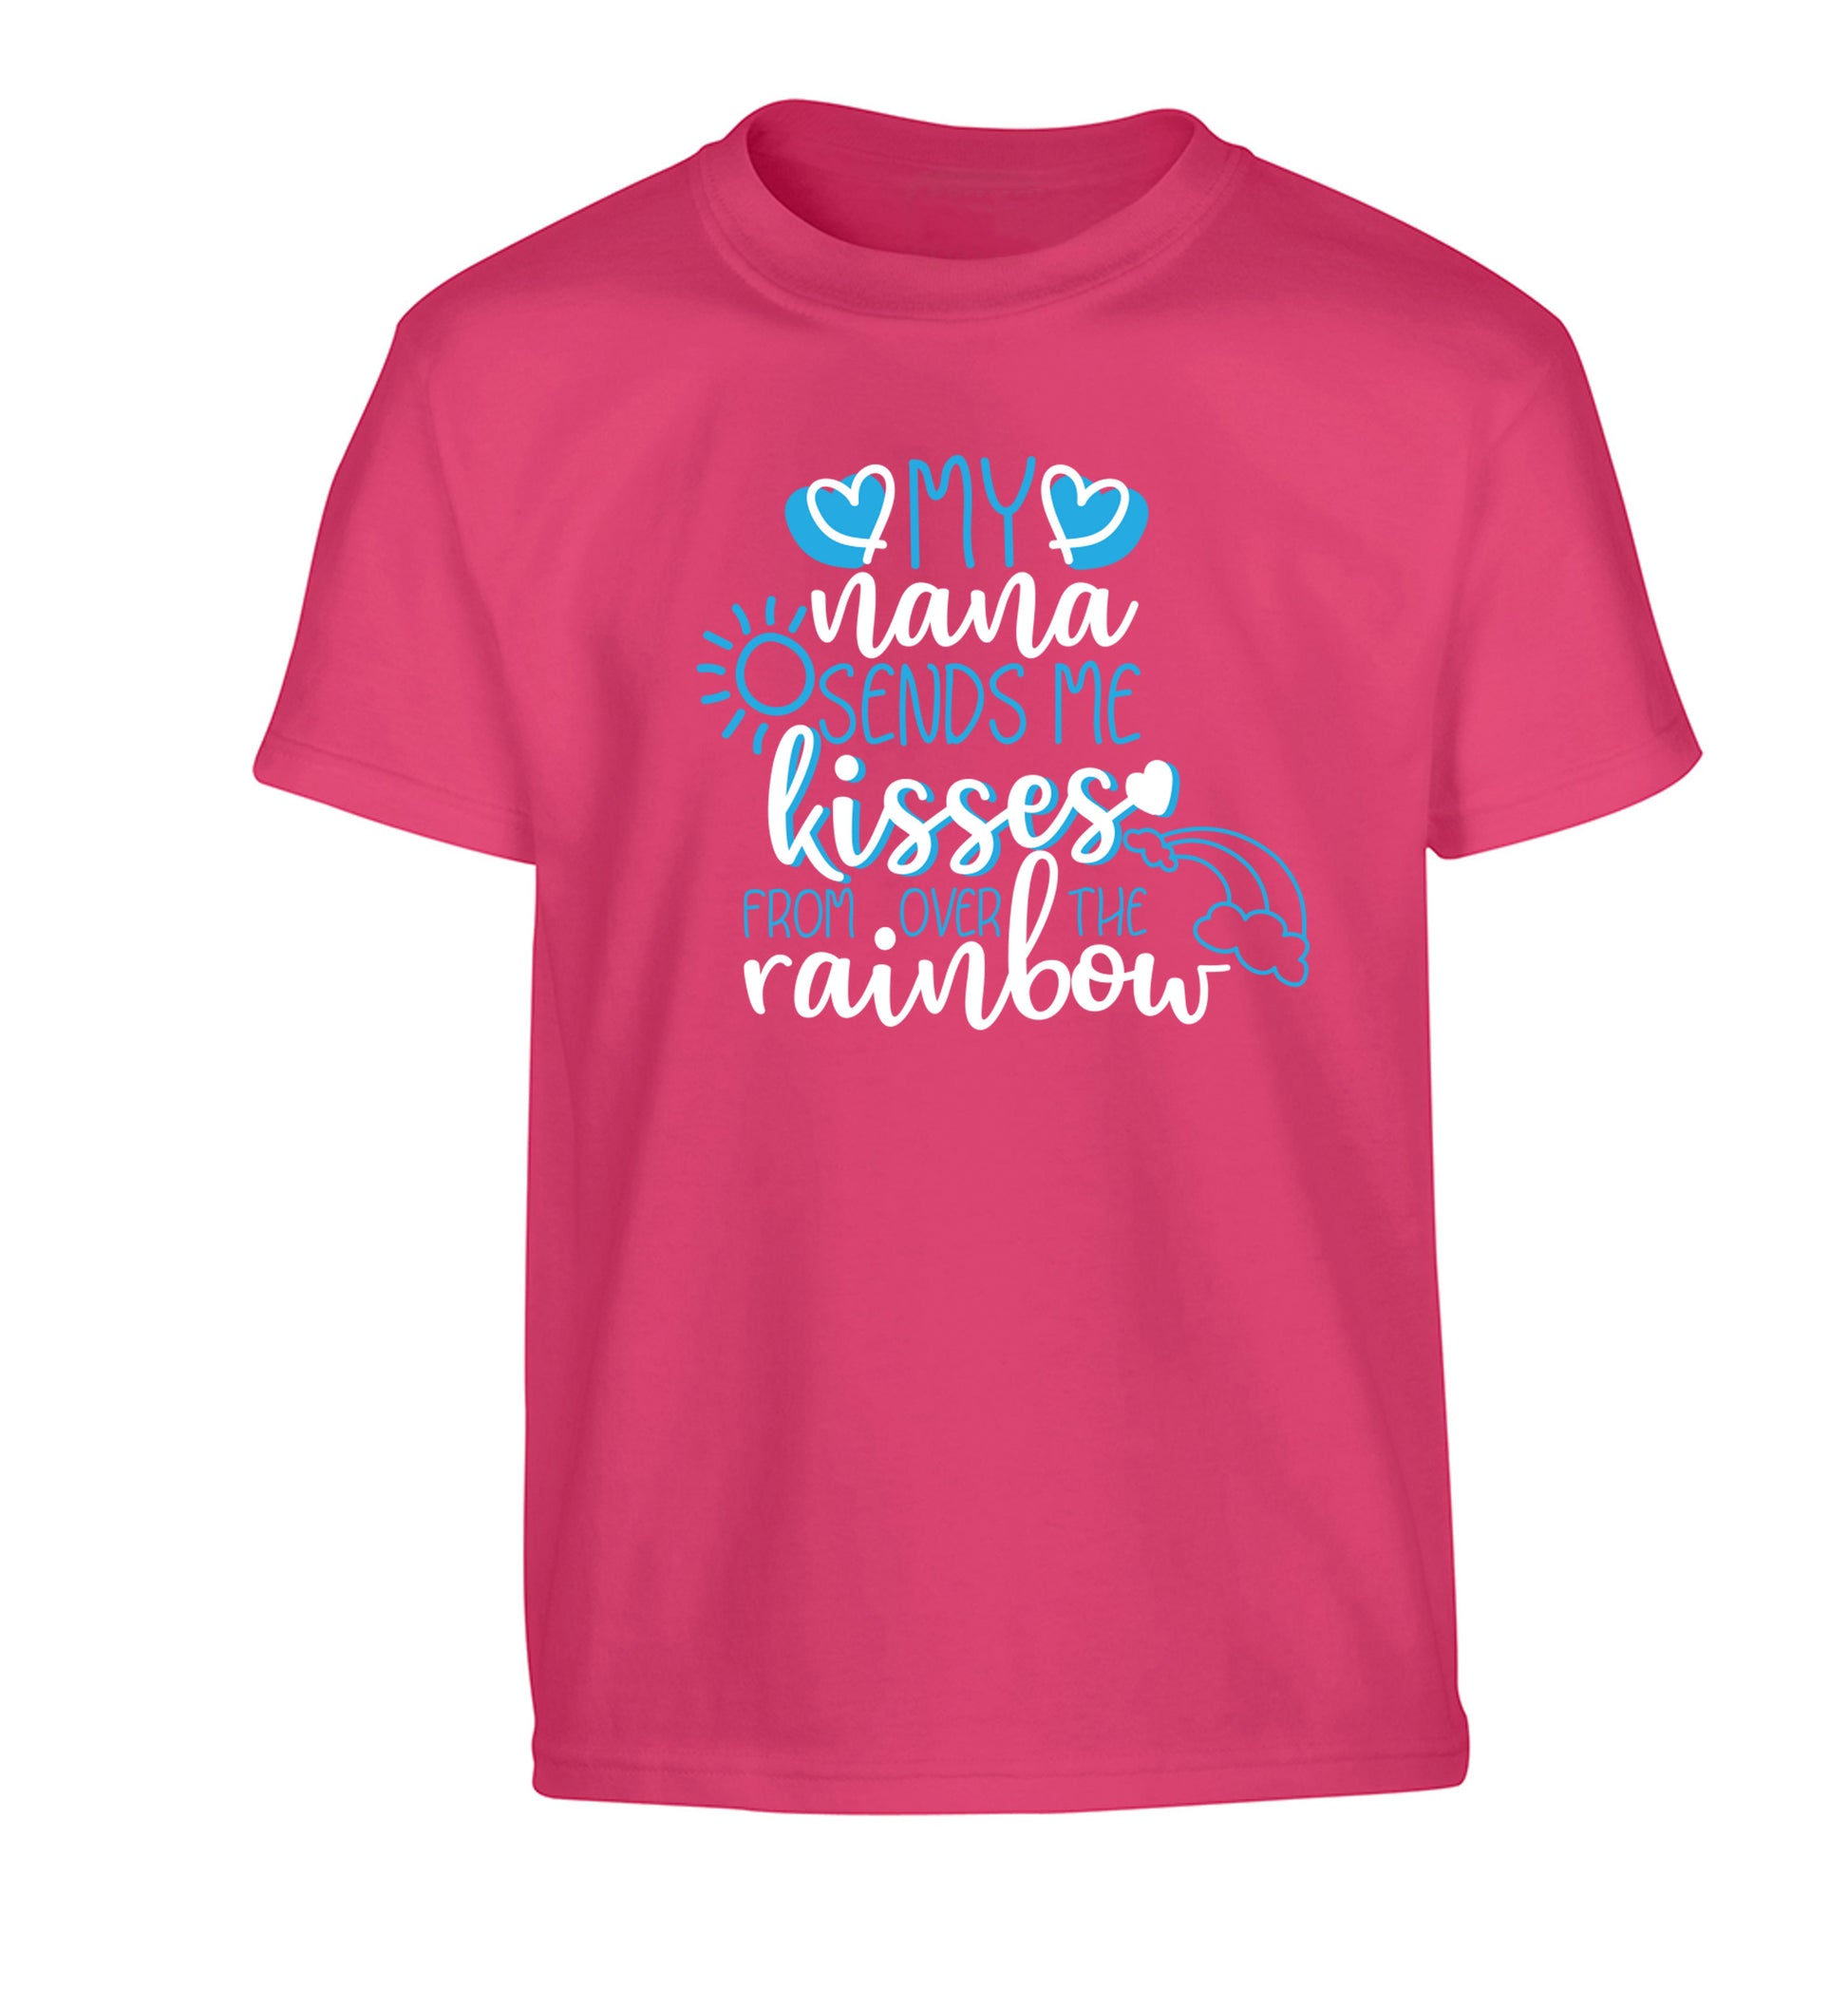 My nana sends me kisses from over the rainbow Children's pink Tshirt 12-13 Years